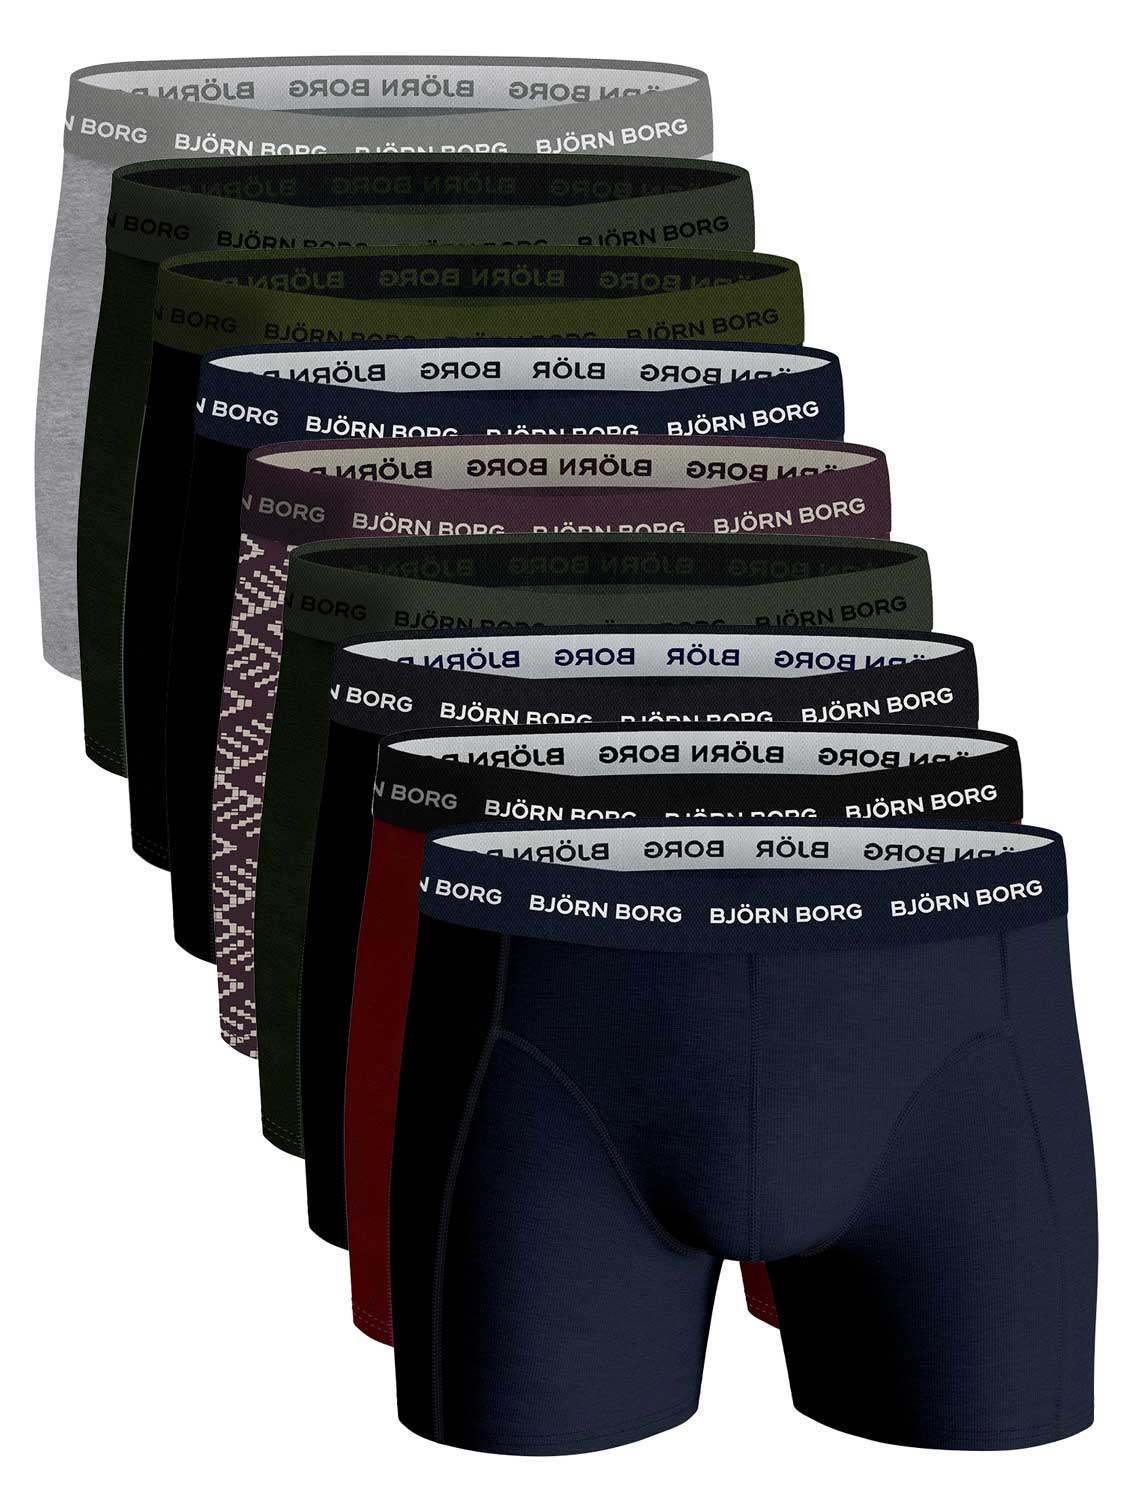 Björn Borg Cotton Stretch boxers - heren boxers normale lengte (9-pack) - multicolor - Maat: M